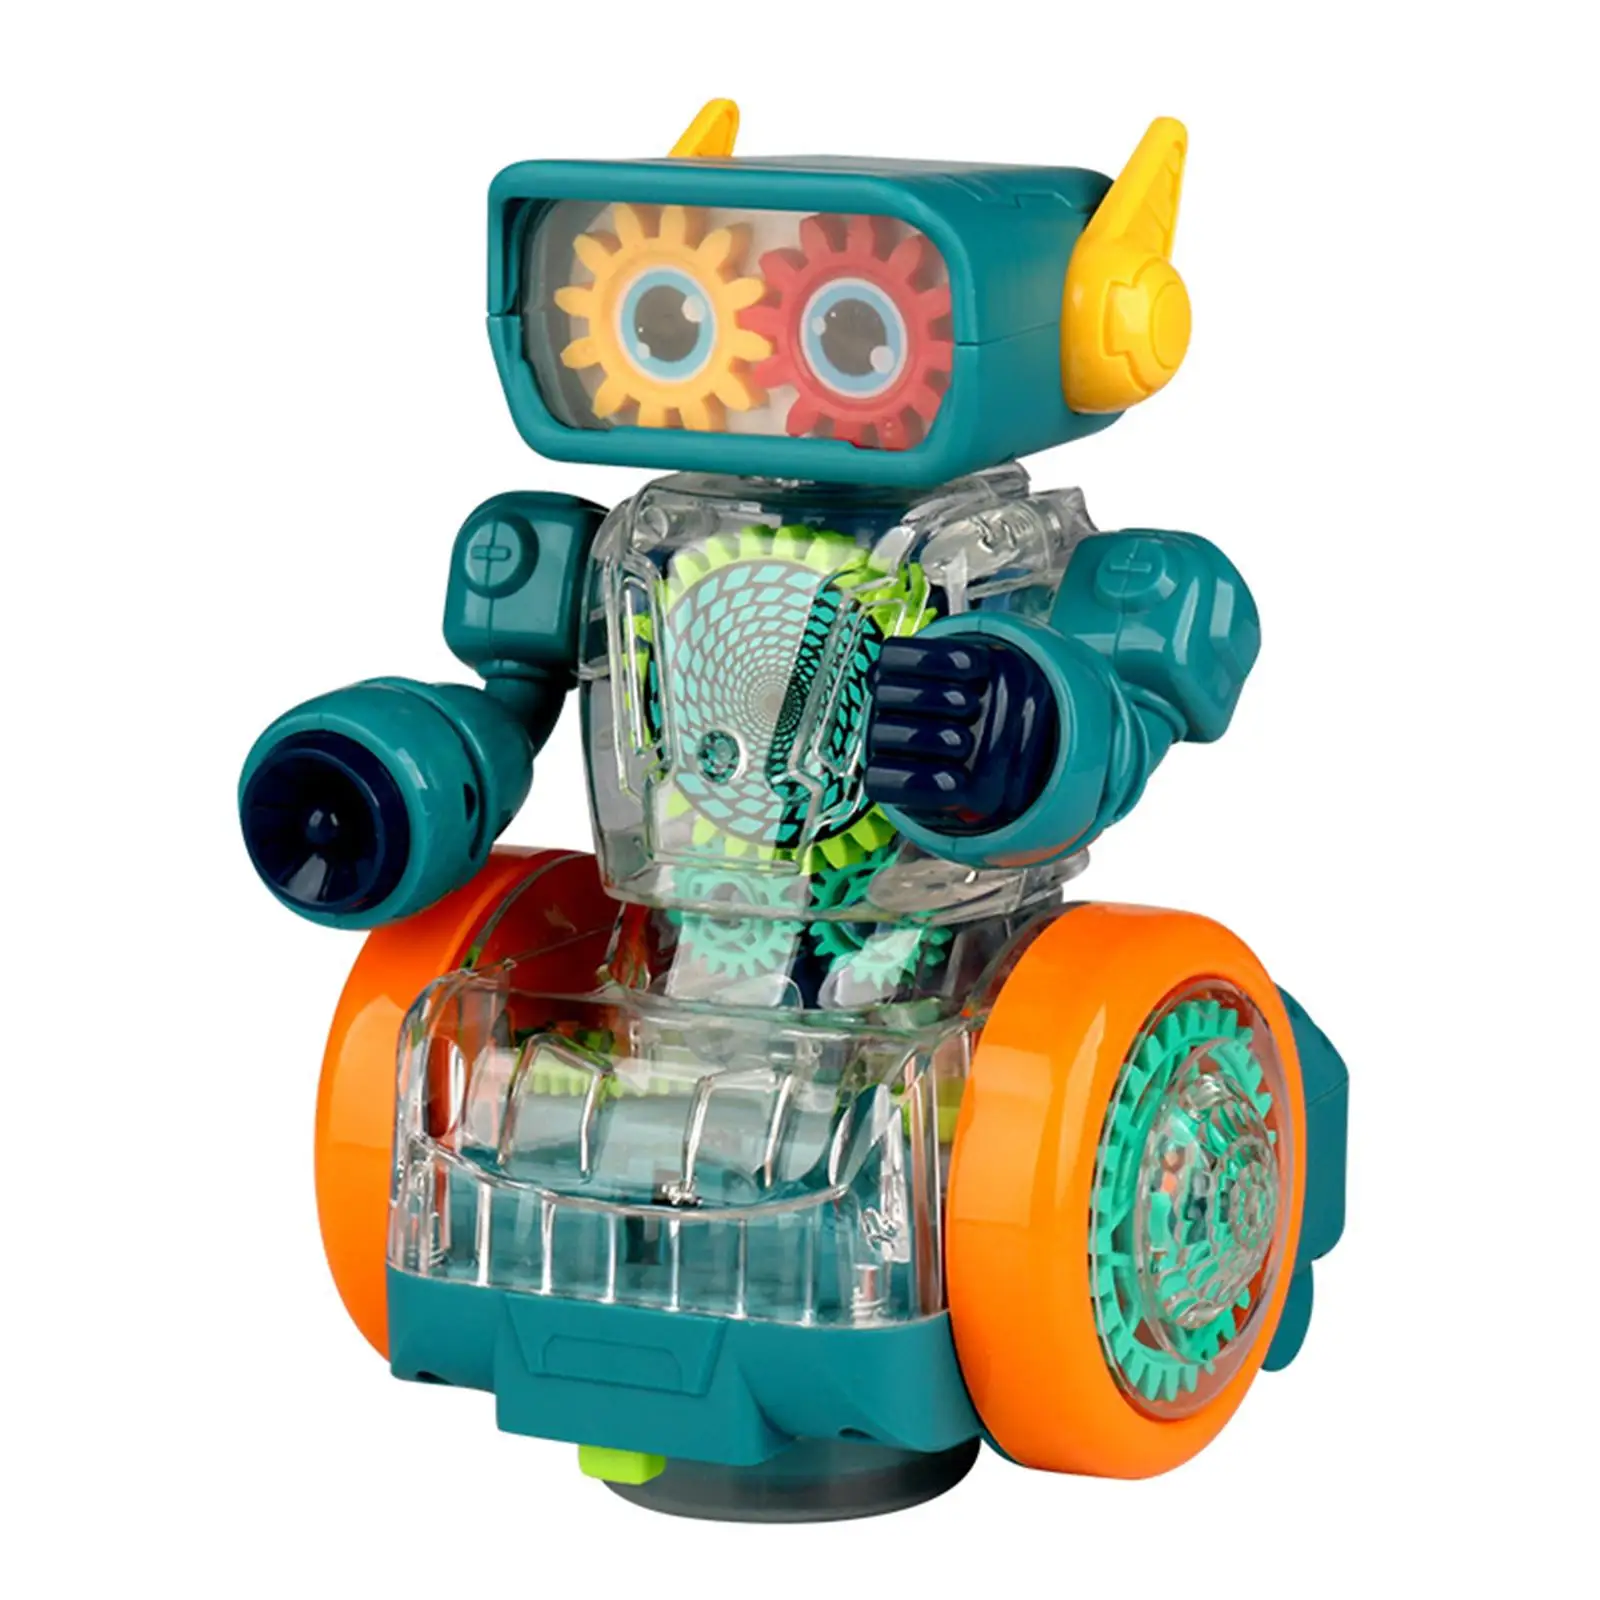 Mechanical Gear Robot Toy with Visible Moving Gears for Girls Birthday Gifts